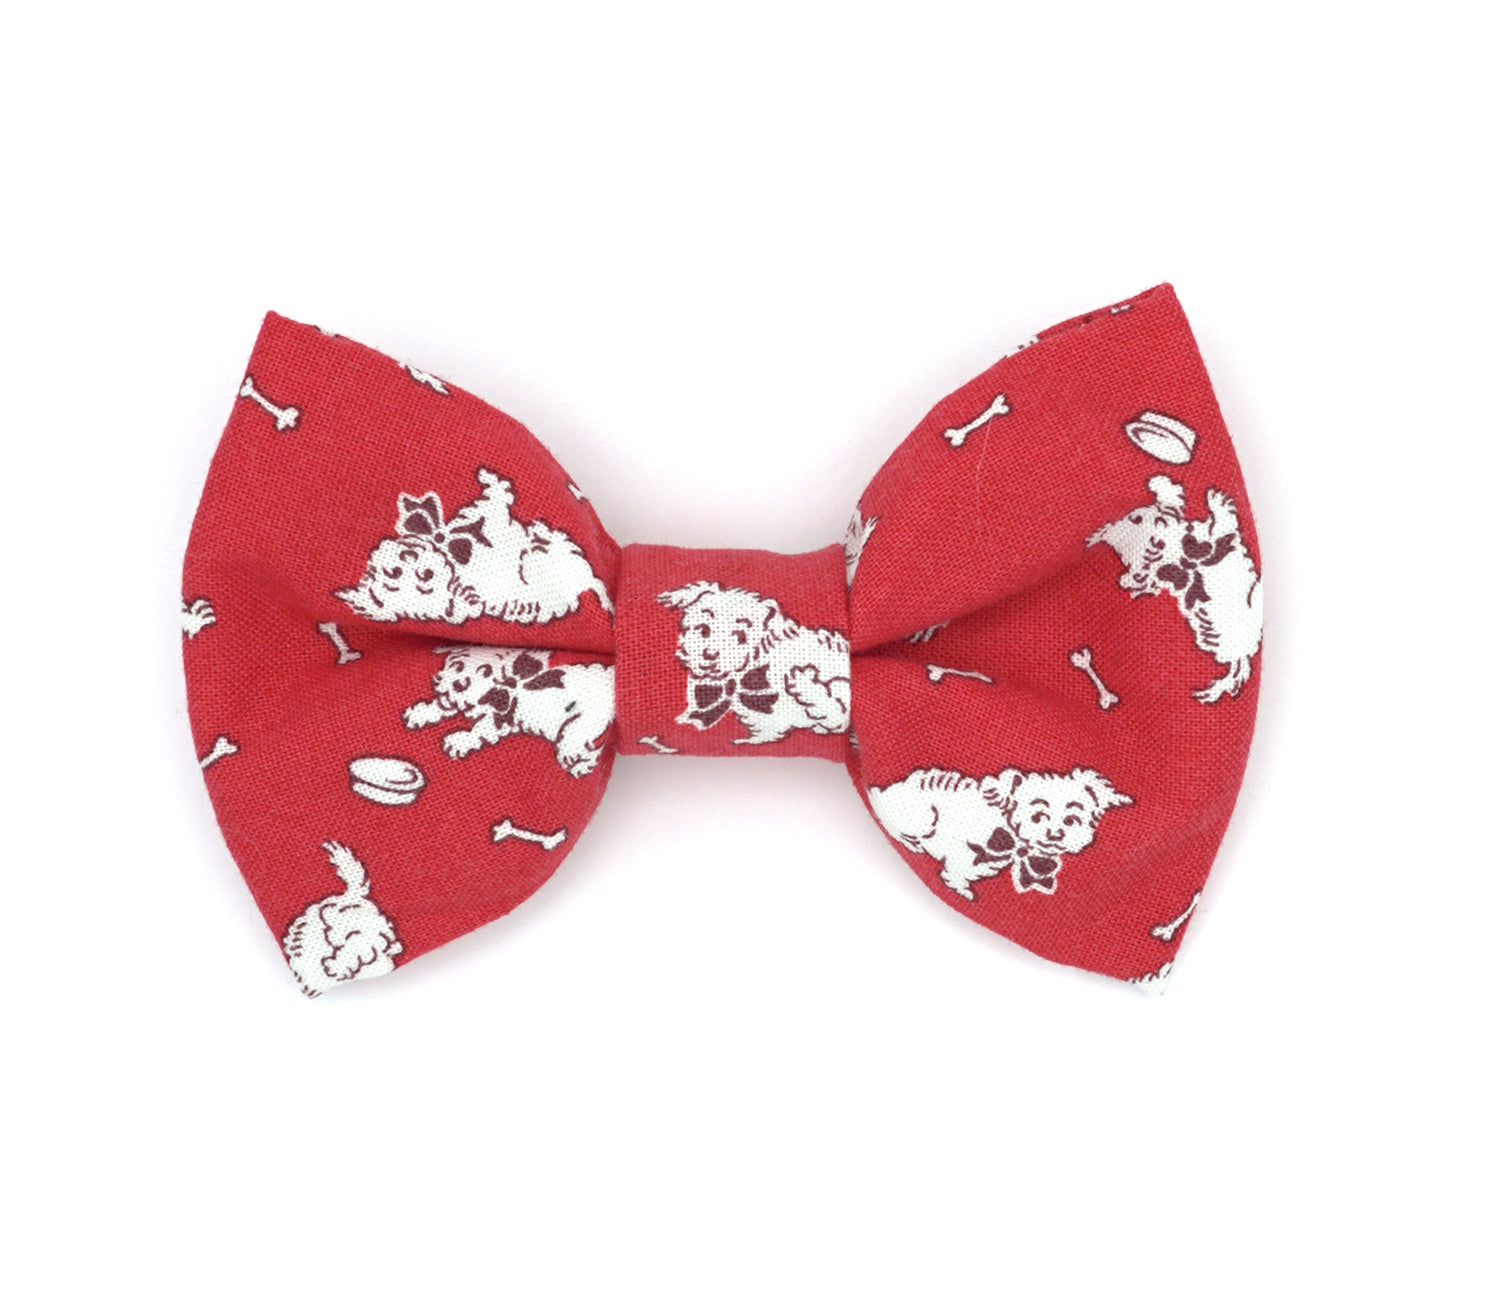 Handmade cotton bow tie for dogs (or other pets). Elastic straps on back with snaps make it easy to add to collar, harness, or leash. Bright red background with playful, white, vintage  puppies.